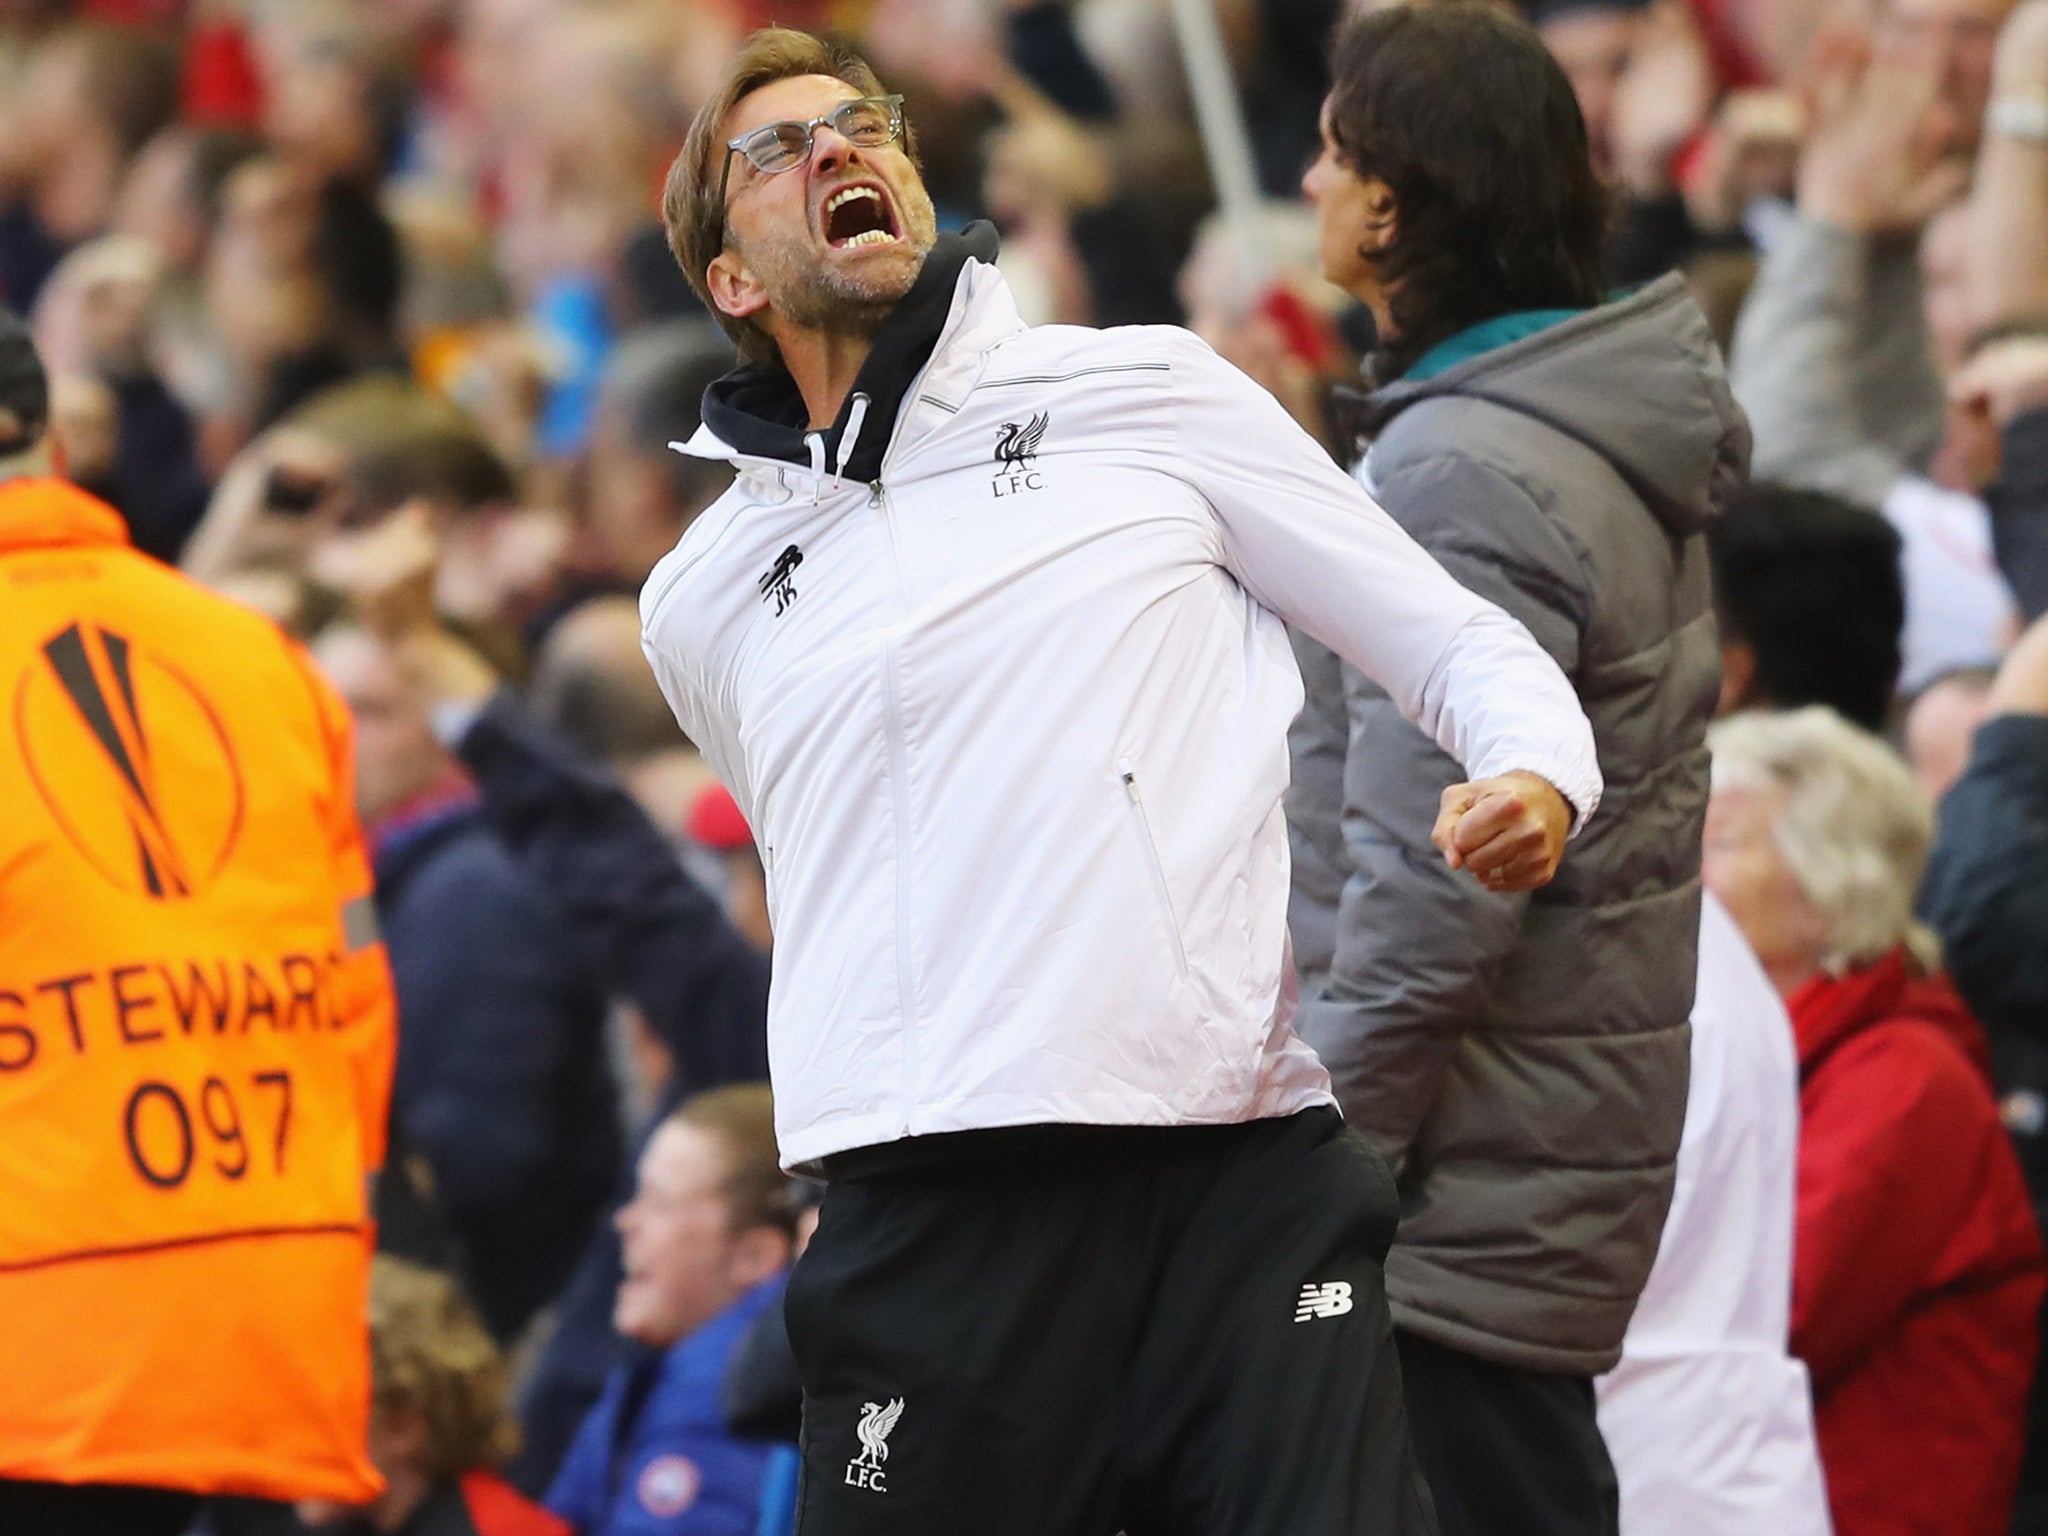 Jurgen Klopp was full of celebrations as Liverpool marched through to the final